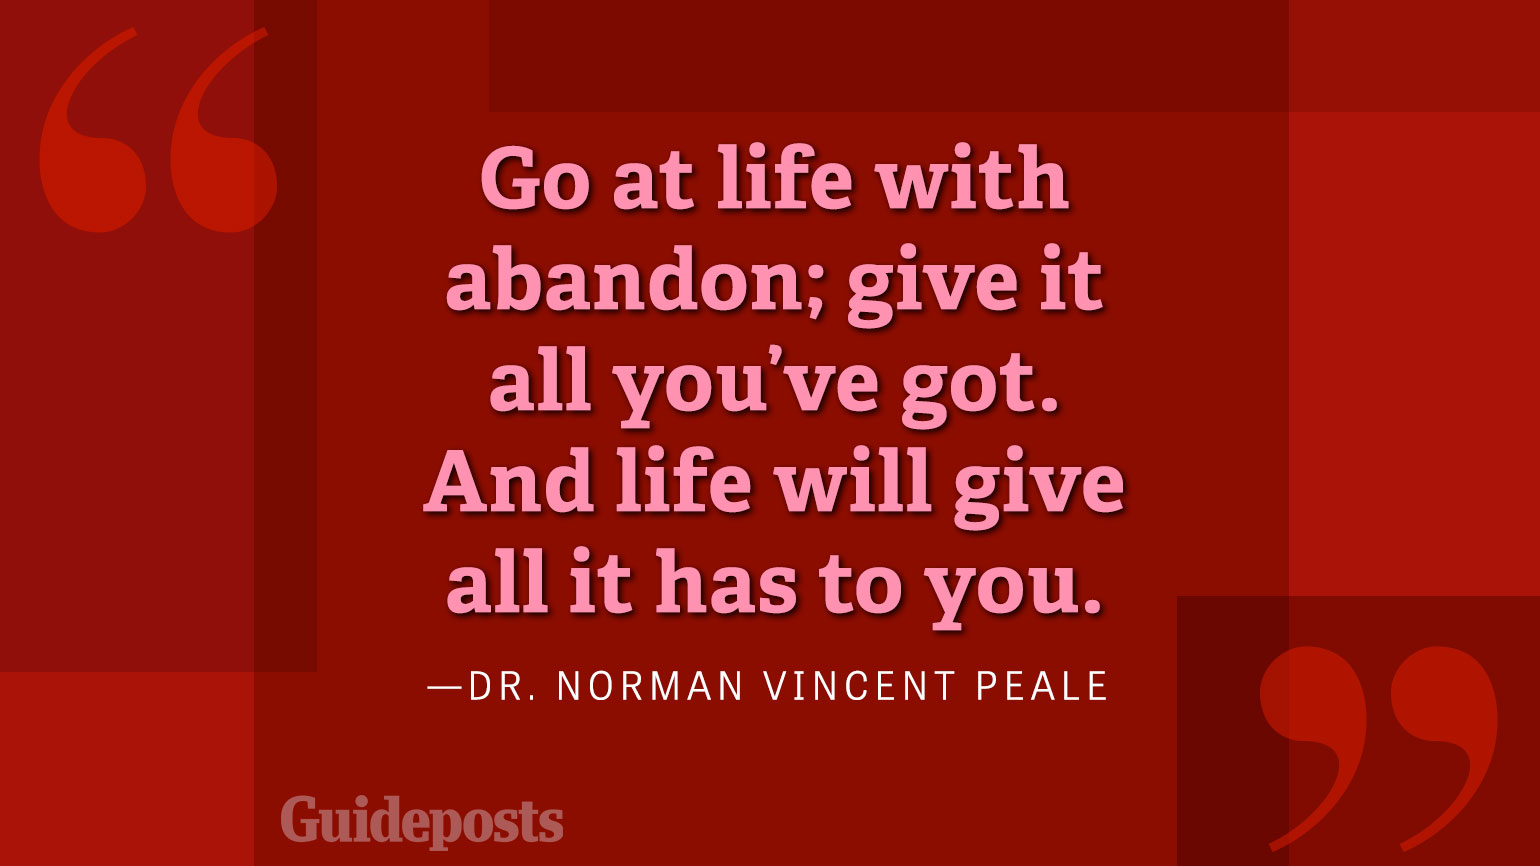 Go at life with abandon; give it all you got. And life will give all it has to you.